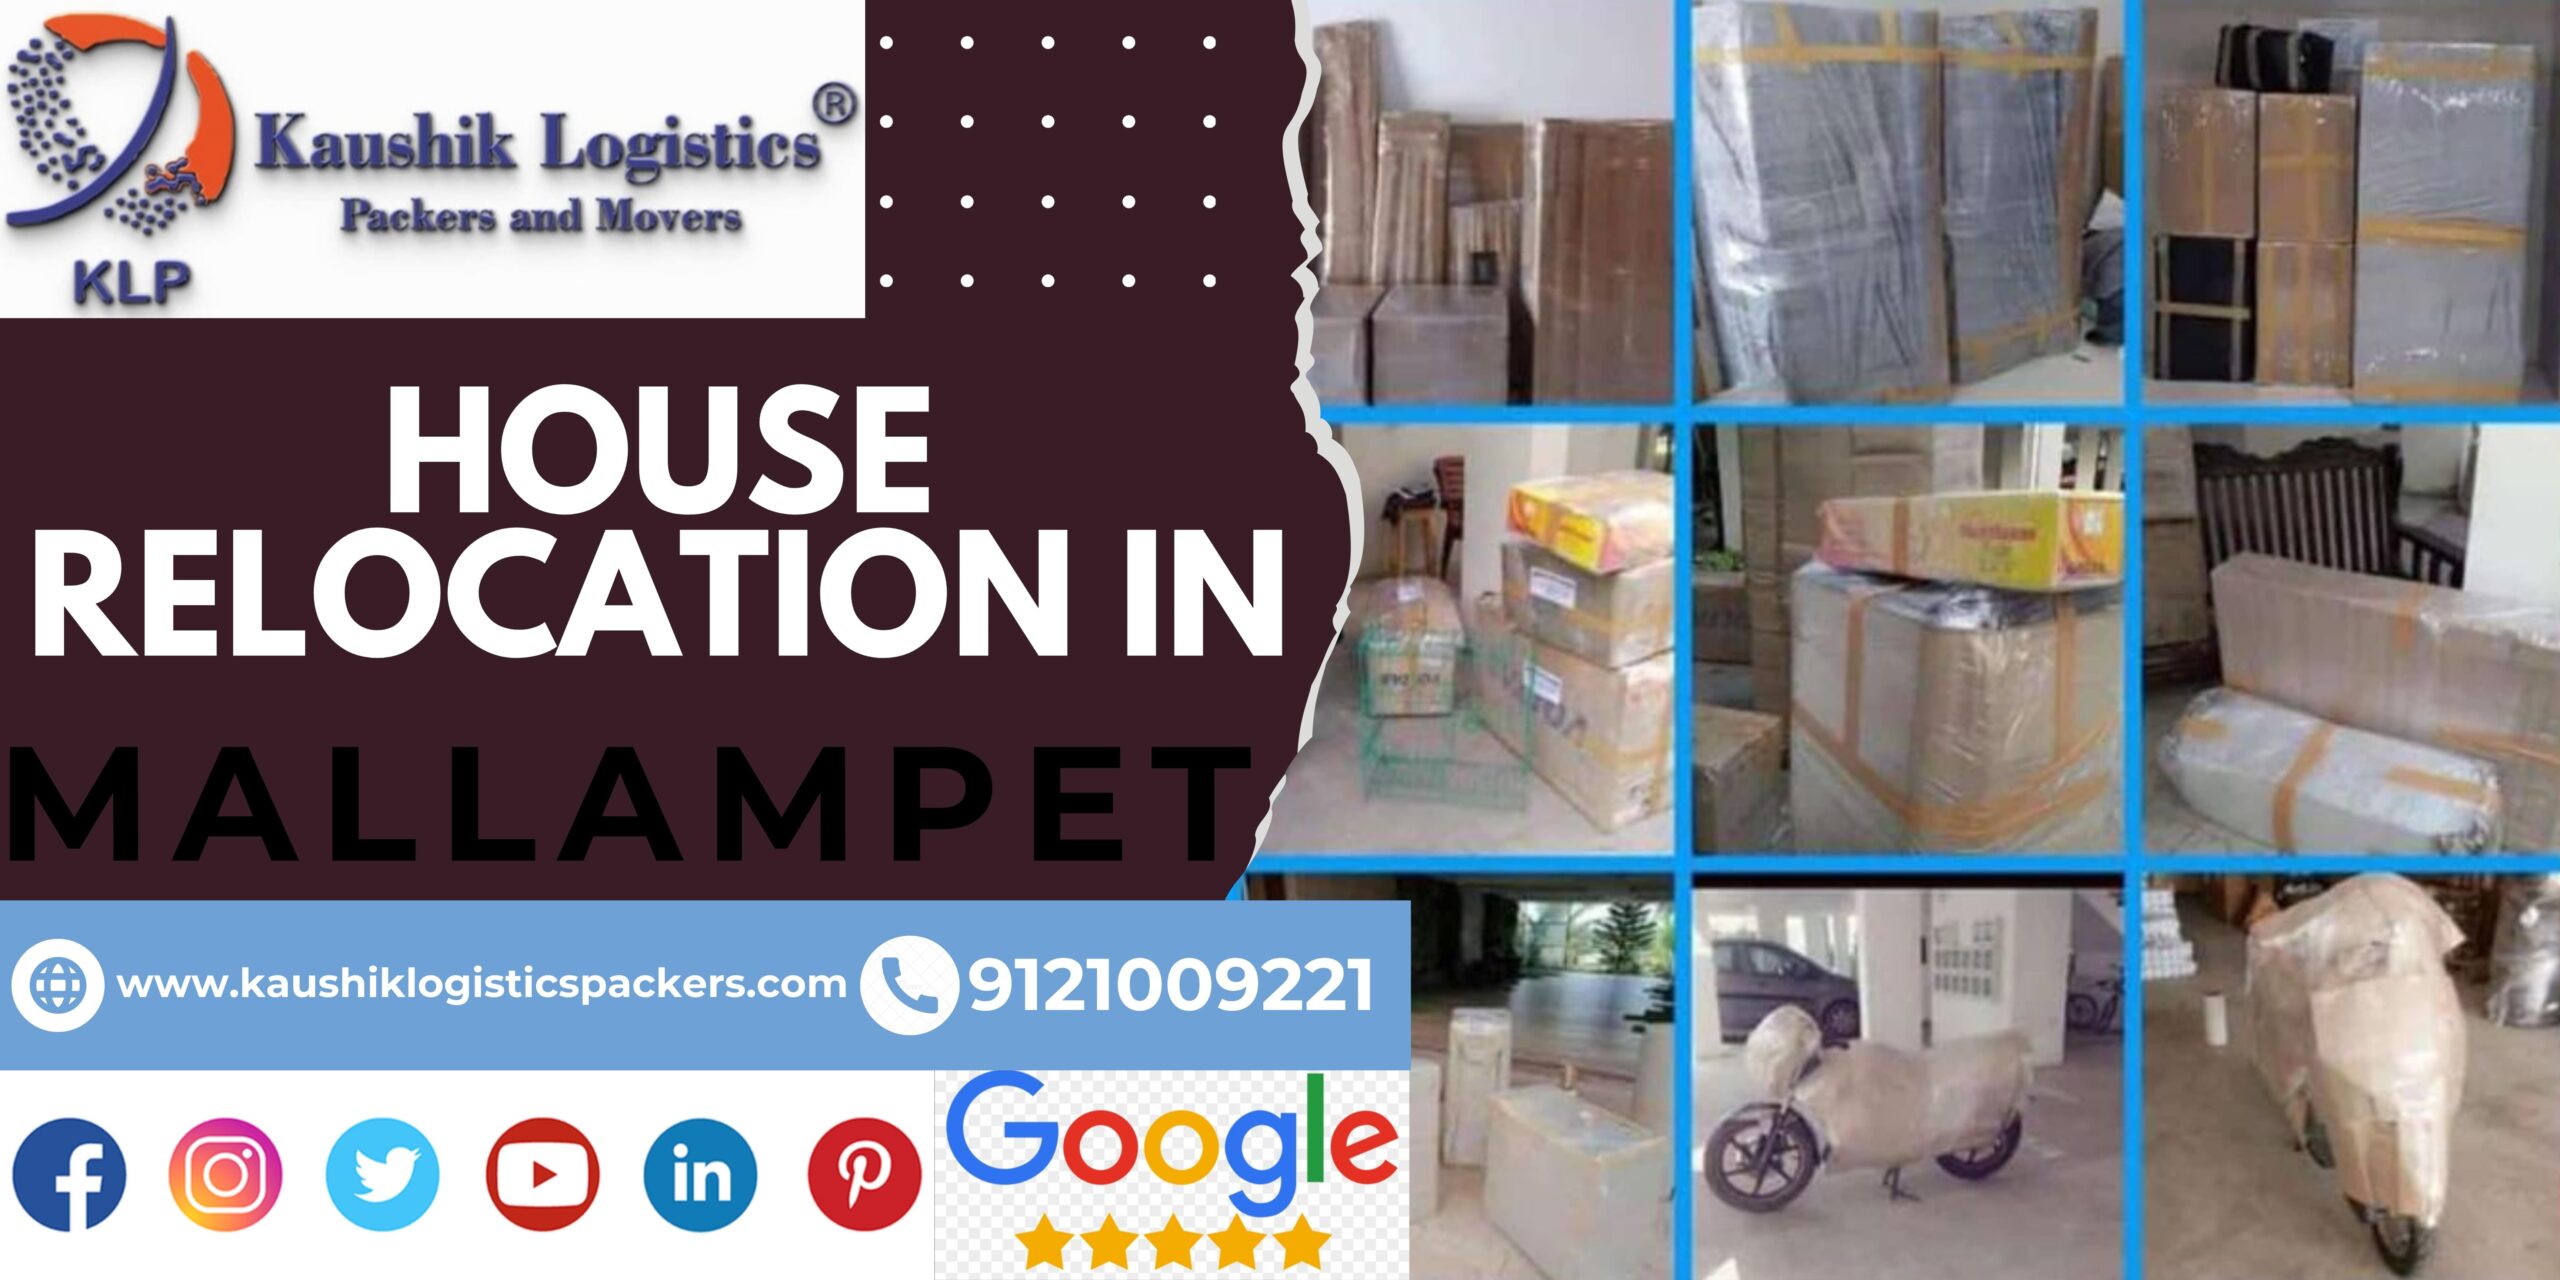 Packers and Movers In Mallampet